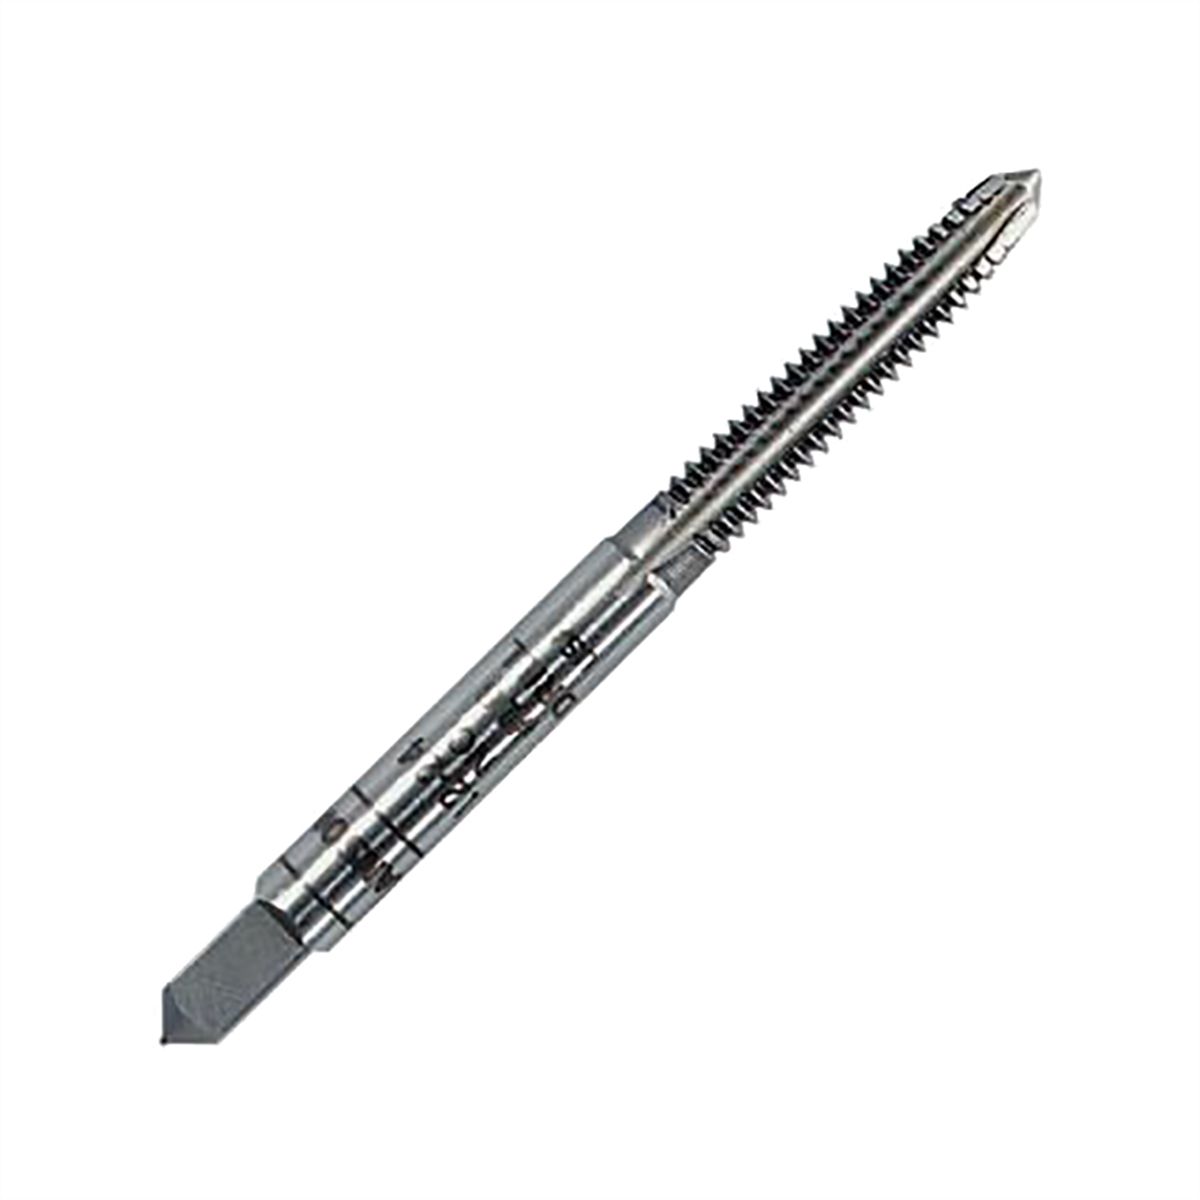 Cut Thread Fractional Taper Tap - 5/16 Inch 24 NF